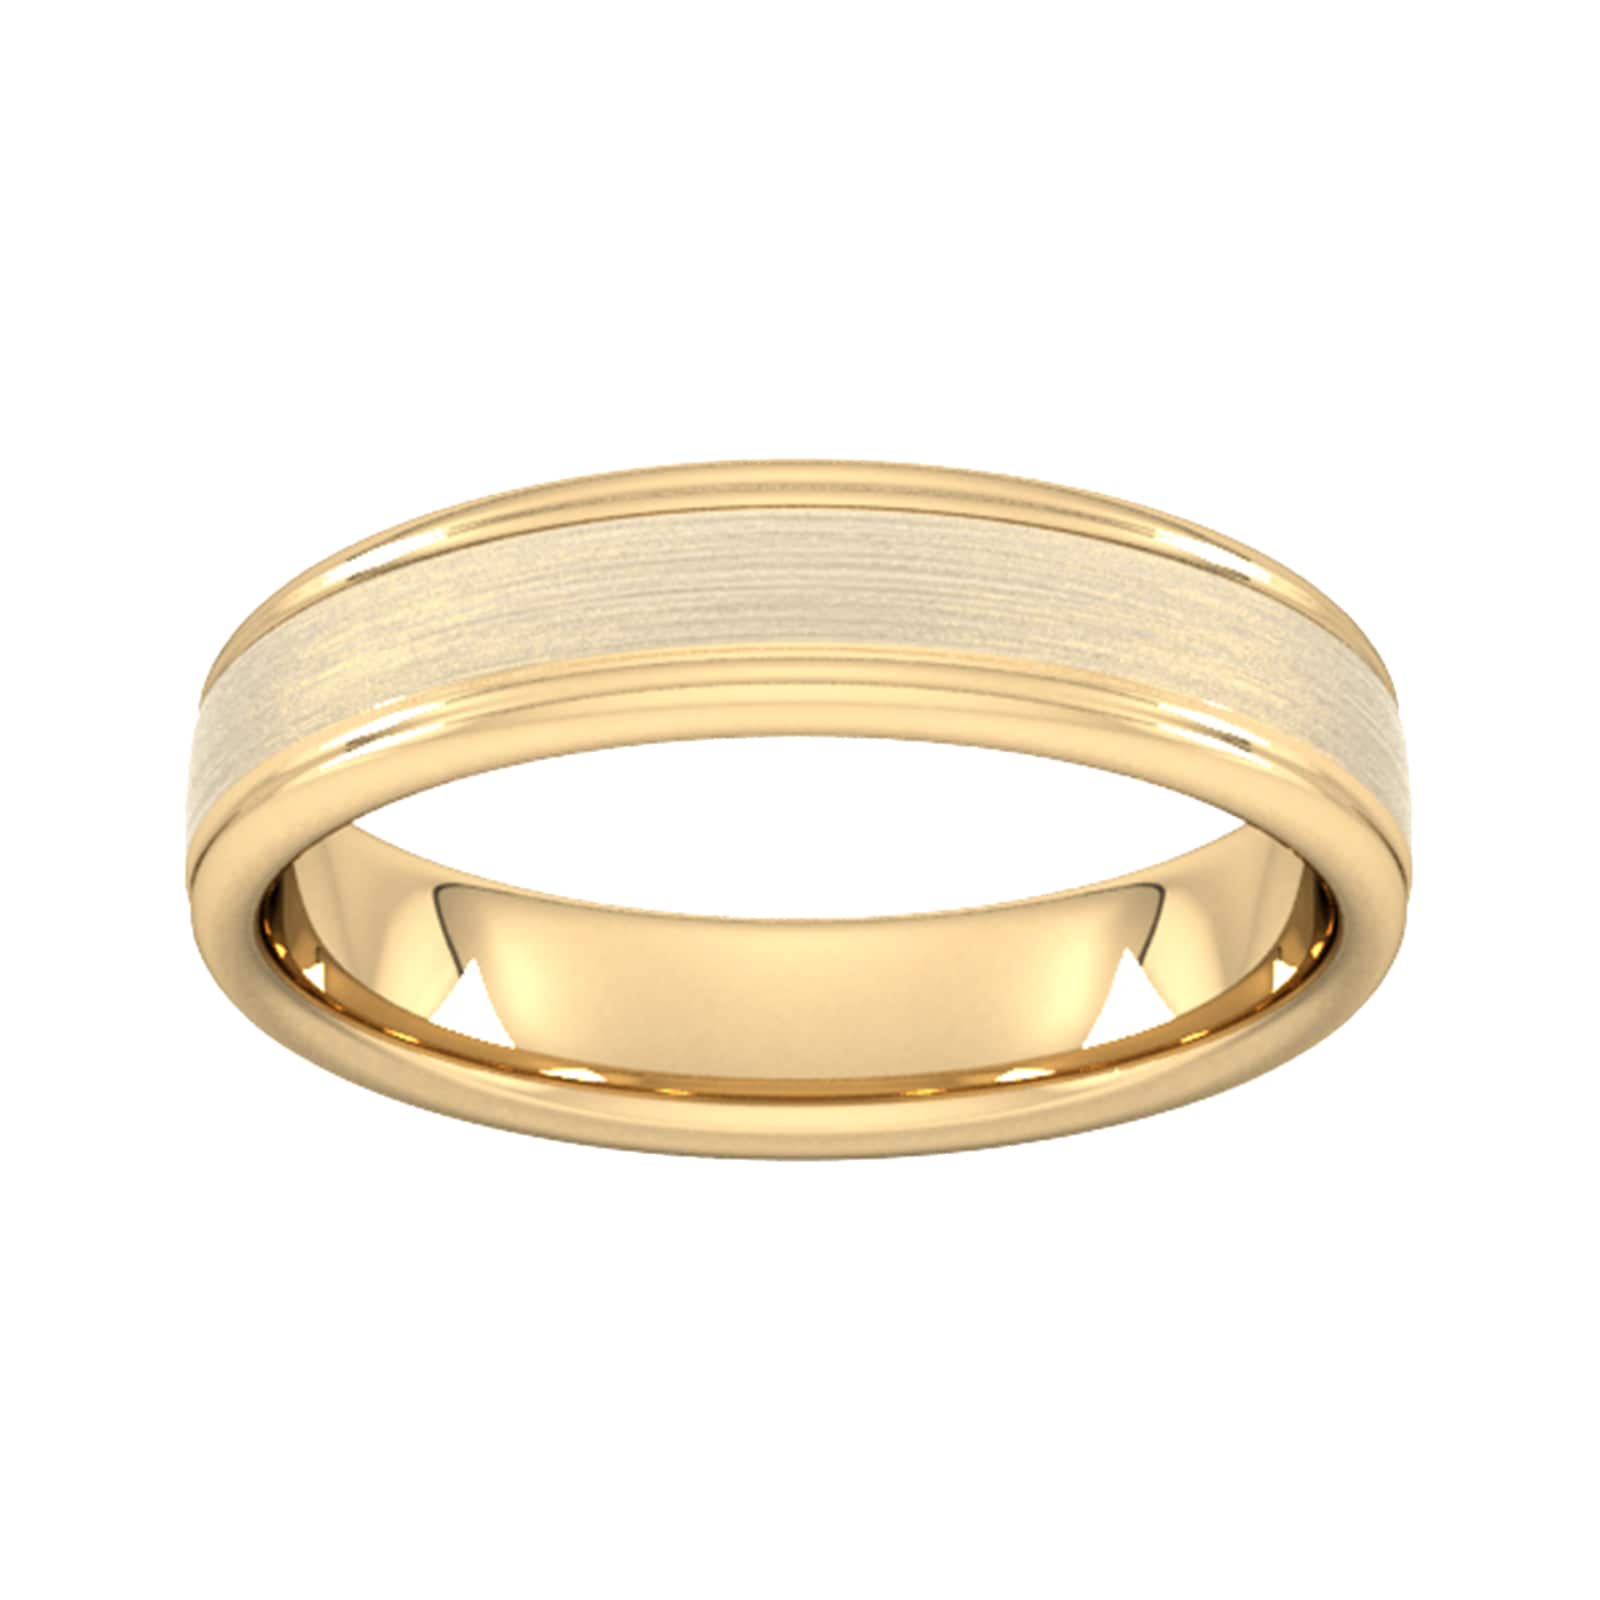 5mm Slight Court Standard Matt Centre With Grooves Wedding Ring In 9 Carat Yellow Gold - Ring Size K